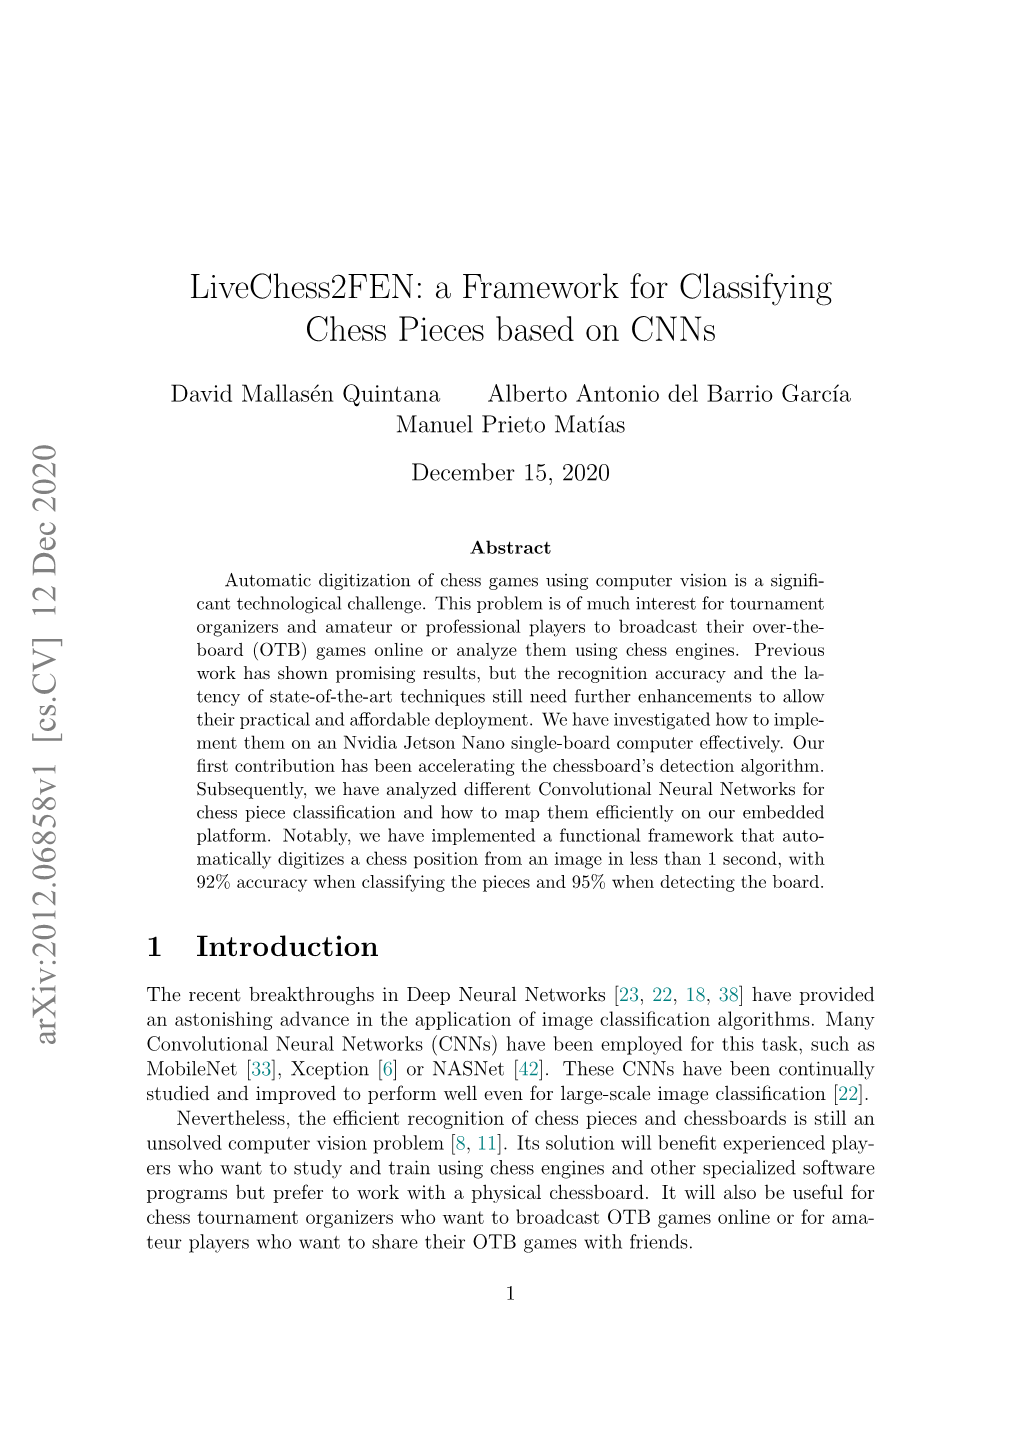 Livechess2fen: a Framework for Classifying Chess Pieces Based on Cnns